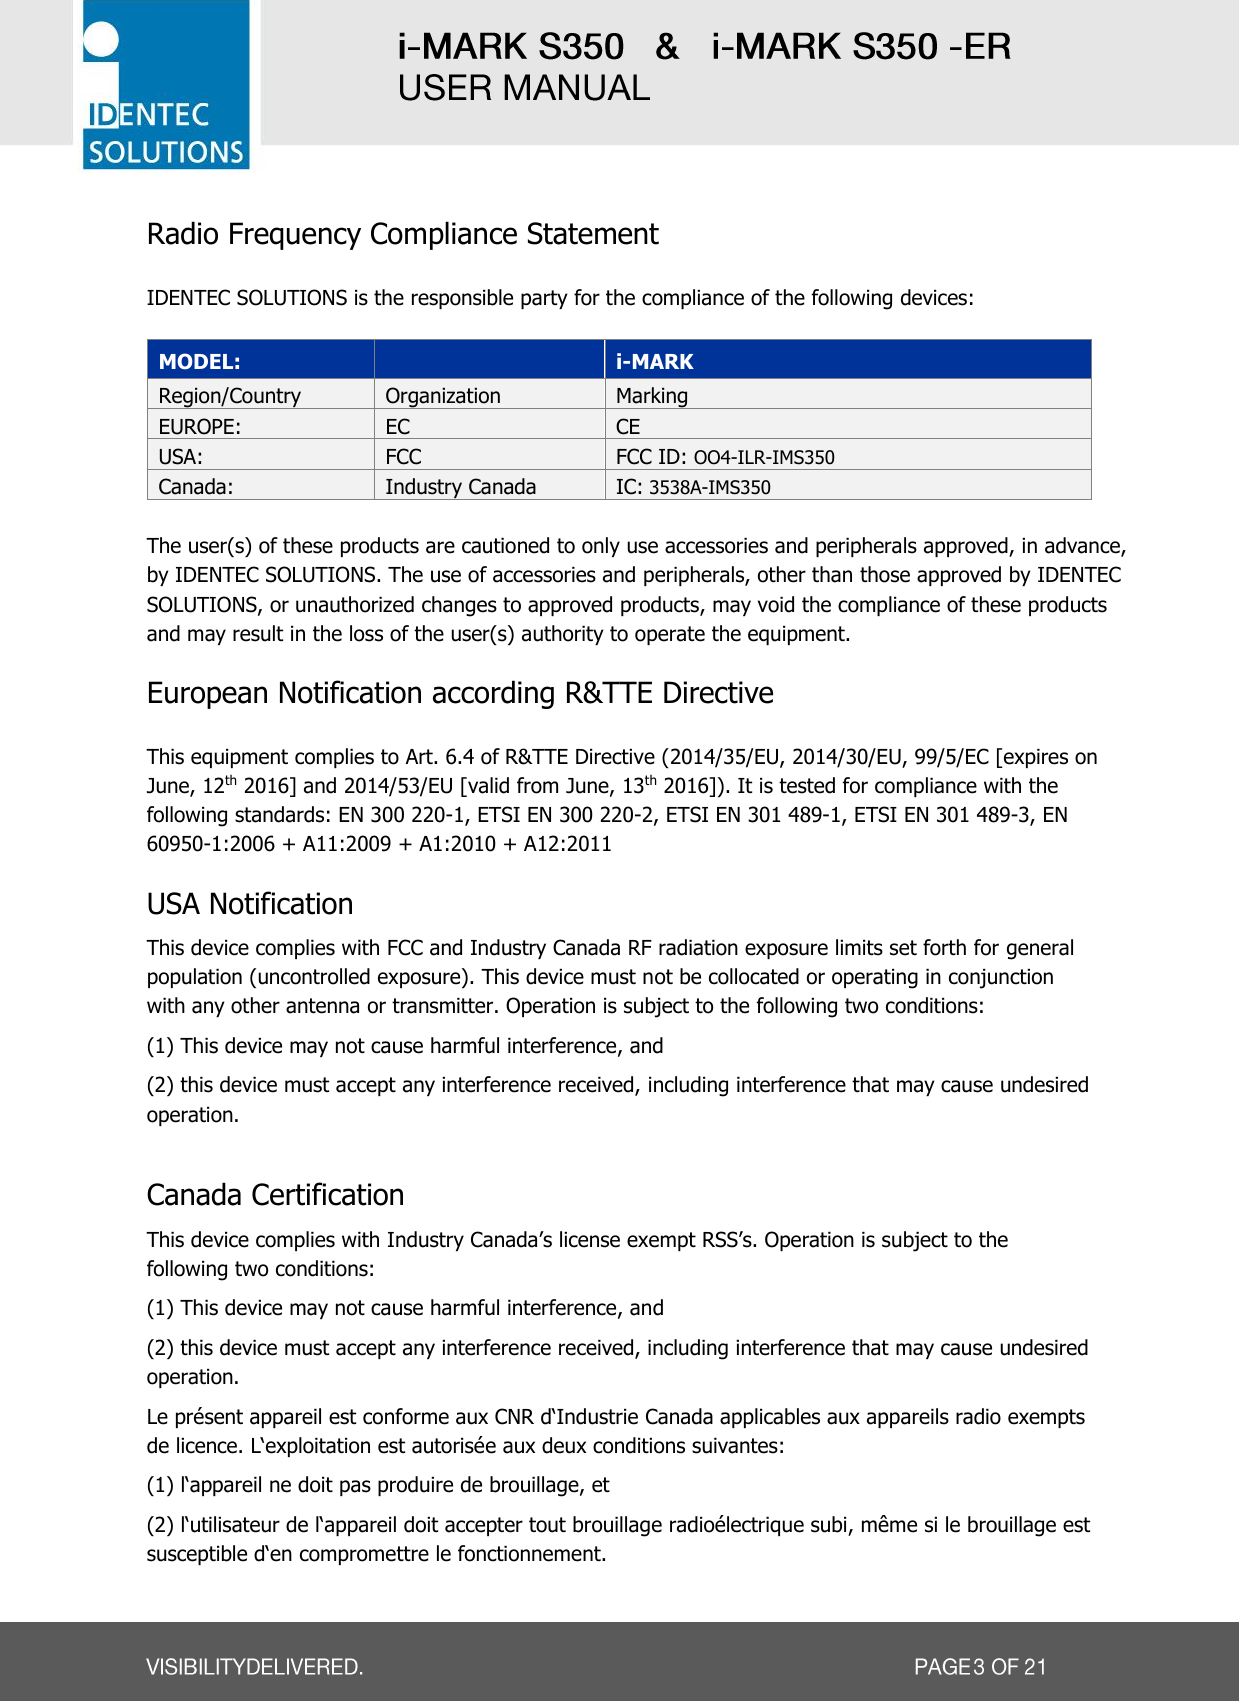   Radio Frequency Compliance Statement  IDENTEC SOLUTIONS is the responsible party for the compliance of the following devices:  MODEL:  i-MARK Region/Country Organization Marking EUROPE: EC CE USA: FCC FCC ID: OO4-ILR-IMS350 Canada: Industry Canada IC: 3538A-IMS350  The user(s) of these products are cautioned to only use accessories and peripherals approved, in advance, by IDENTEC SOLUTIONS. The use of accessories and peripherals, other than those approved by IDENTEC SOLUTIONS, or unauthorized changes to approved products, may void the compliance of these products and may result in the loss of the user(s) authority to operate the equipment.  European Notification according R&amp;TTE Directive  This equipment complies to Art. 6.4 of R&amp;TTE Directive (2014/35/EU, 2014/30/EU, 99/5/EC [expires on June, 12th 2016] and 2014/53/EU [valid from June, 13th 2016]). It is tested for compliance with the following standards: EN 300 220-1, ETSI EN 300 220-2, ETSI EN 301 489-1, ETSI EN 301 489-3, EN 60950-1:2006 + A11:2009 + A1:2010 + A12:2011    USA Notification This device complies with FCC and Industry Canada RF radiation exposure limits set forth for general population (uncontrolled exposure). This device must not be collocated or operating in conjunction with any other antenna or transmitter. Operation is subject to the following two conditions:  (1) This device may not cause harmful interference, and  (2) this device must accept any interference received, including interference that may cause undesired operation.  Canada Certification This device complies with Industry Canada’s license exempt RSS’s. Operation is subject to the following two conditions:  (1) This device may not cause harmful interference, and  (2) this device must accept any interference received, including interference that may cause undesired operation. Le présent appareil est conforme aux CNR d‘Industrie Canada applicables aux appareils radio exempts de licence. L‘exploitation est autorisée aux deux conditions suivantes: (1) l‘appareil ne doit pas produire de brouillage, et (2) l‘utilisateur de l‘appareil doit accepter tout brouillage radioélectrique subi, même si le brouillage est susceptible d‘en compromettre le fonctionnement. 